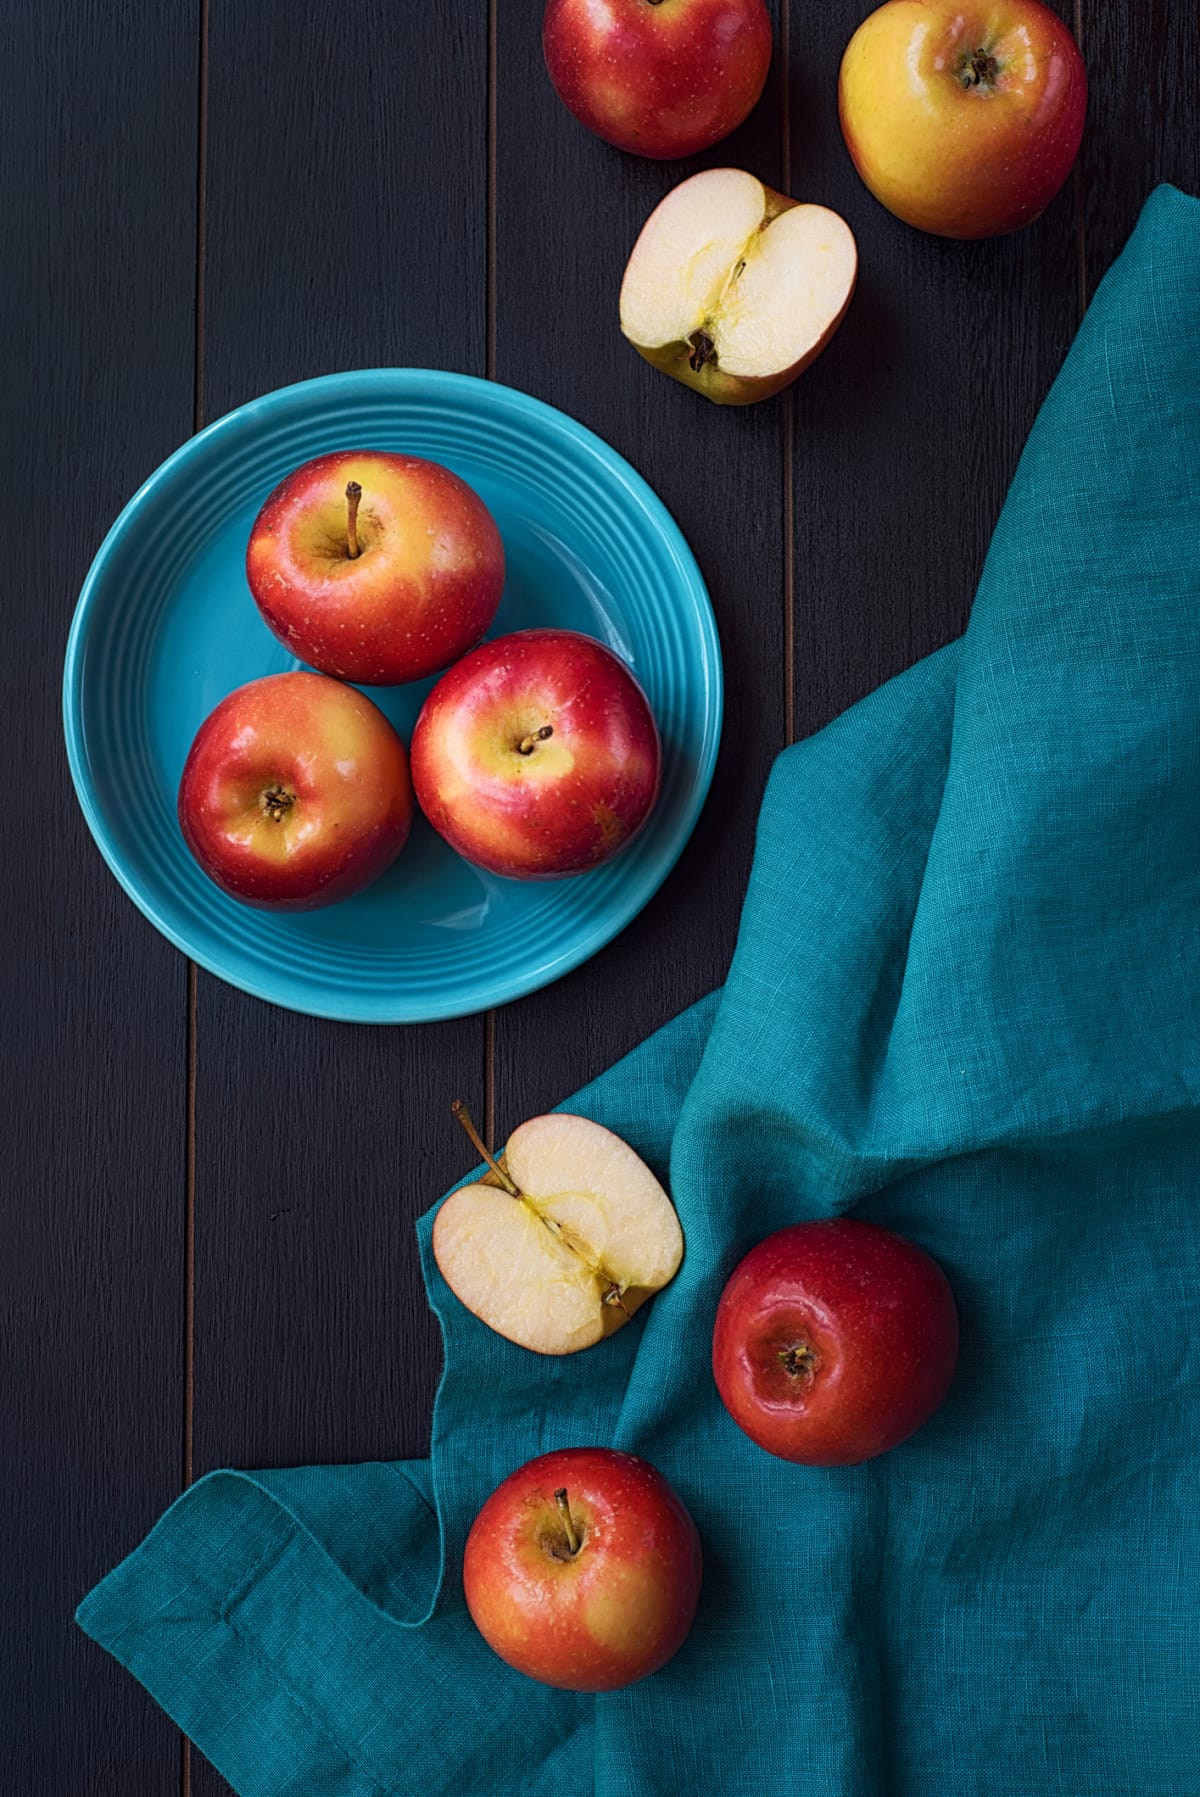 Composition of fresh apples on a blue plate and a blue napkin on a black wooden table